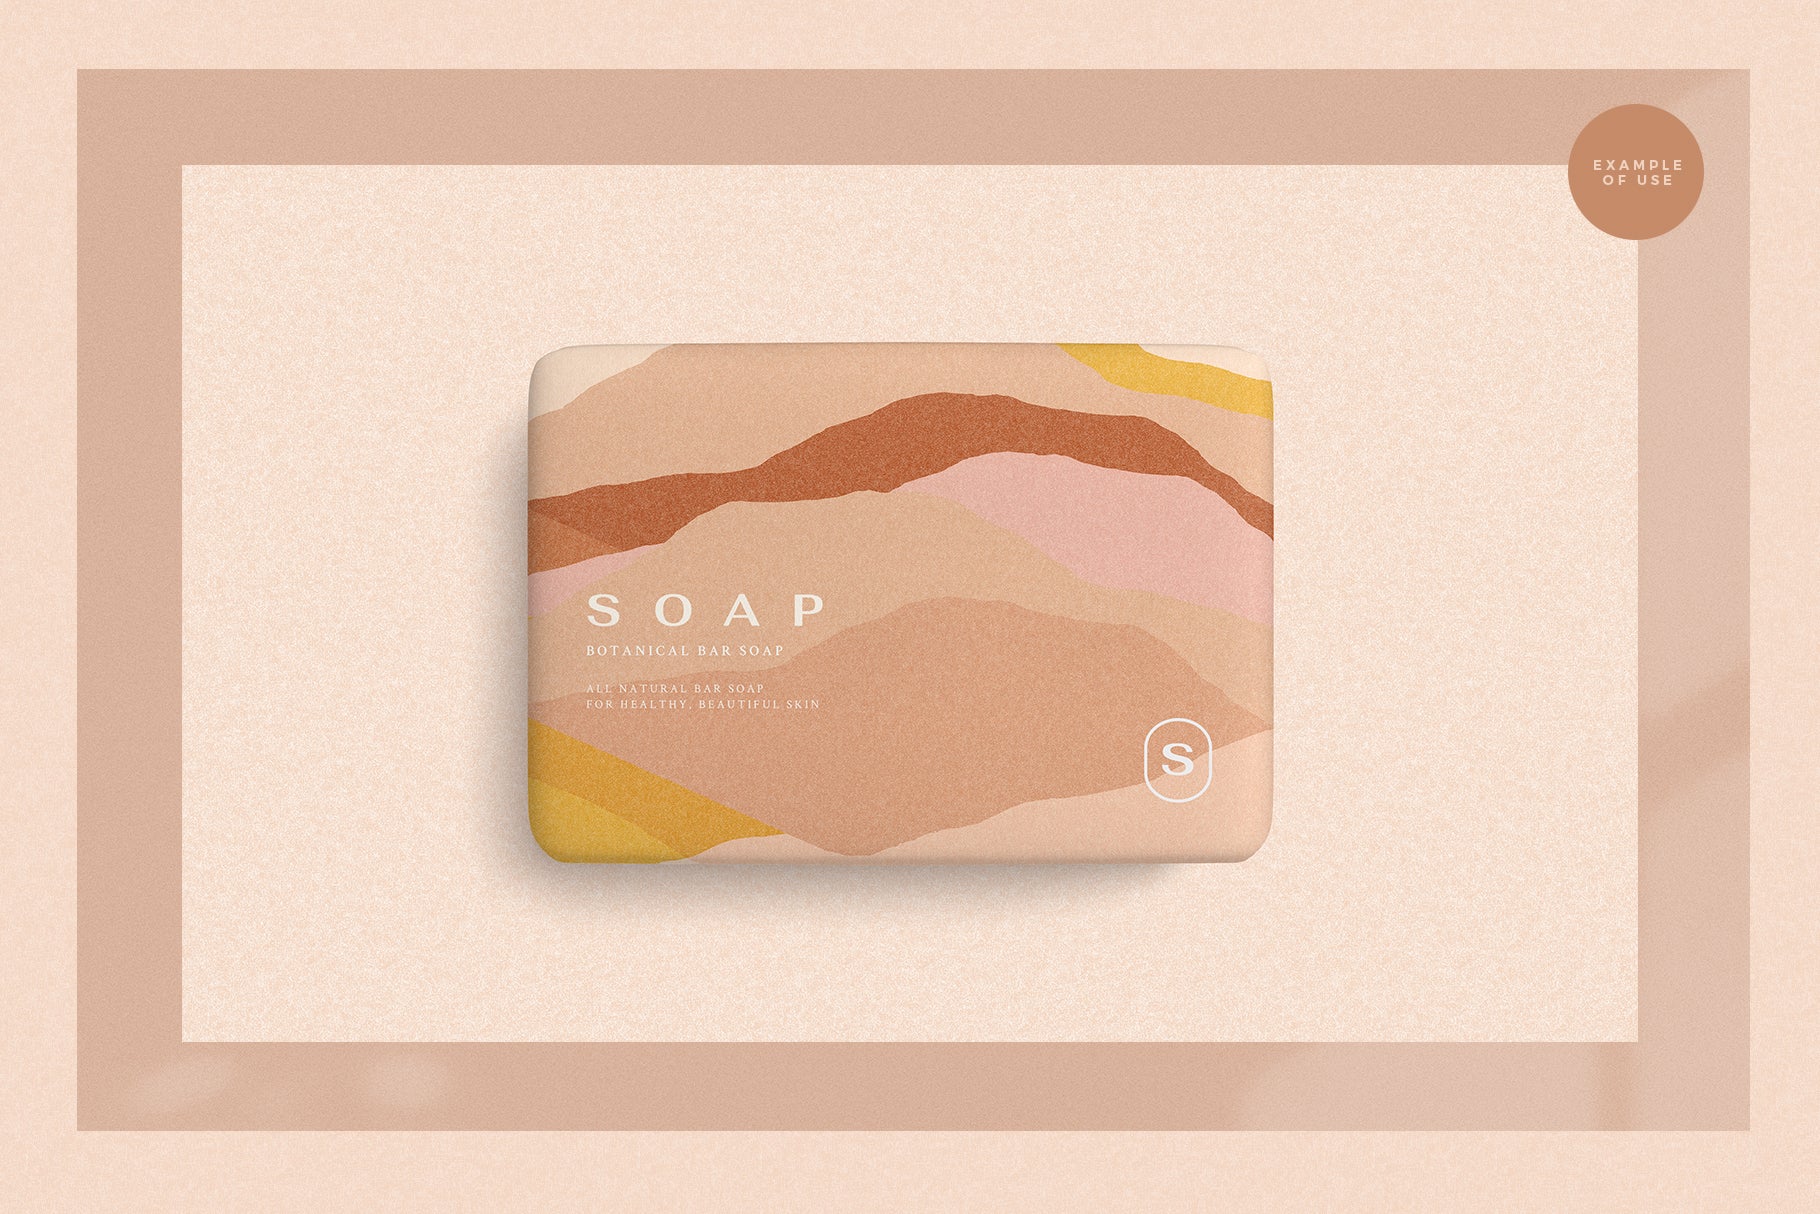 bar soap packaging design with abstract shapes